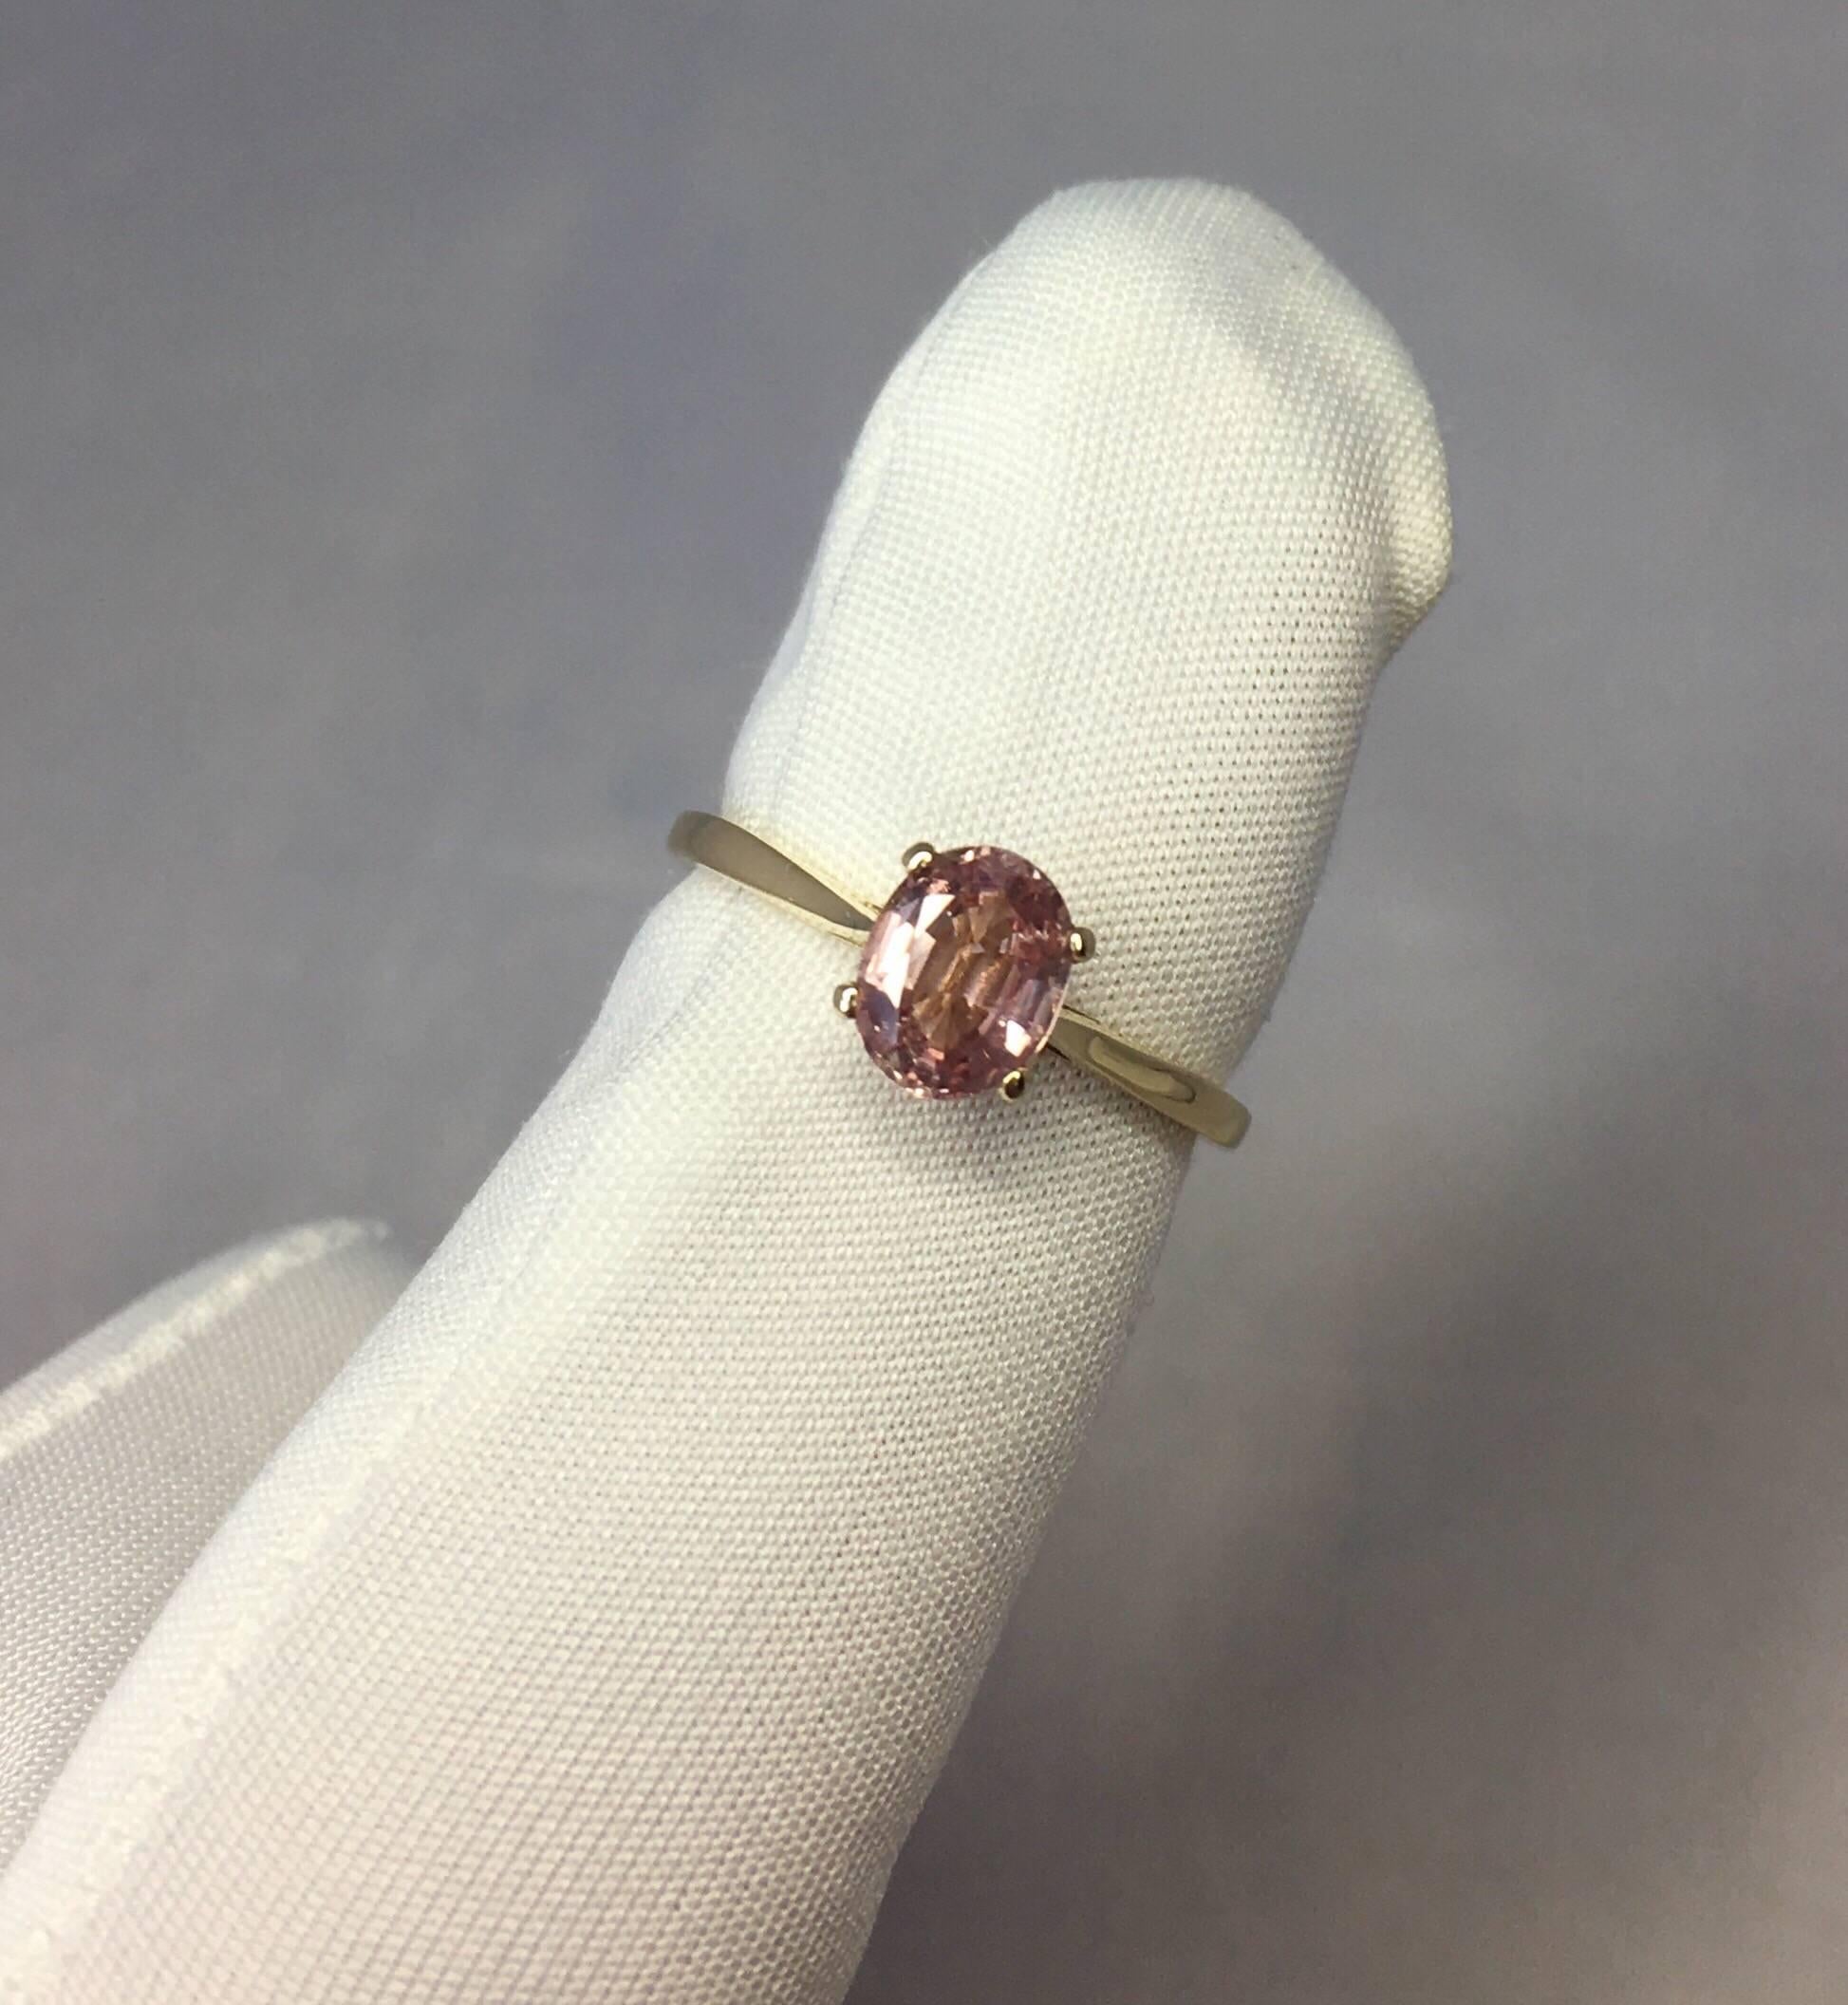 Stunning Ceylon pink orange sapphire set in a fine 14k yellow gold solitaire ring.

Totally untreated and unheated, comes with full IGI report to confirm stone is untreated and Ceylon in origin.

1.10 carat sapphire with stunning colour, described